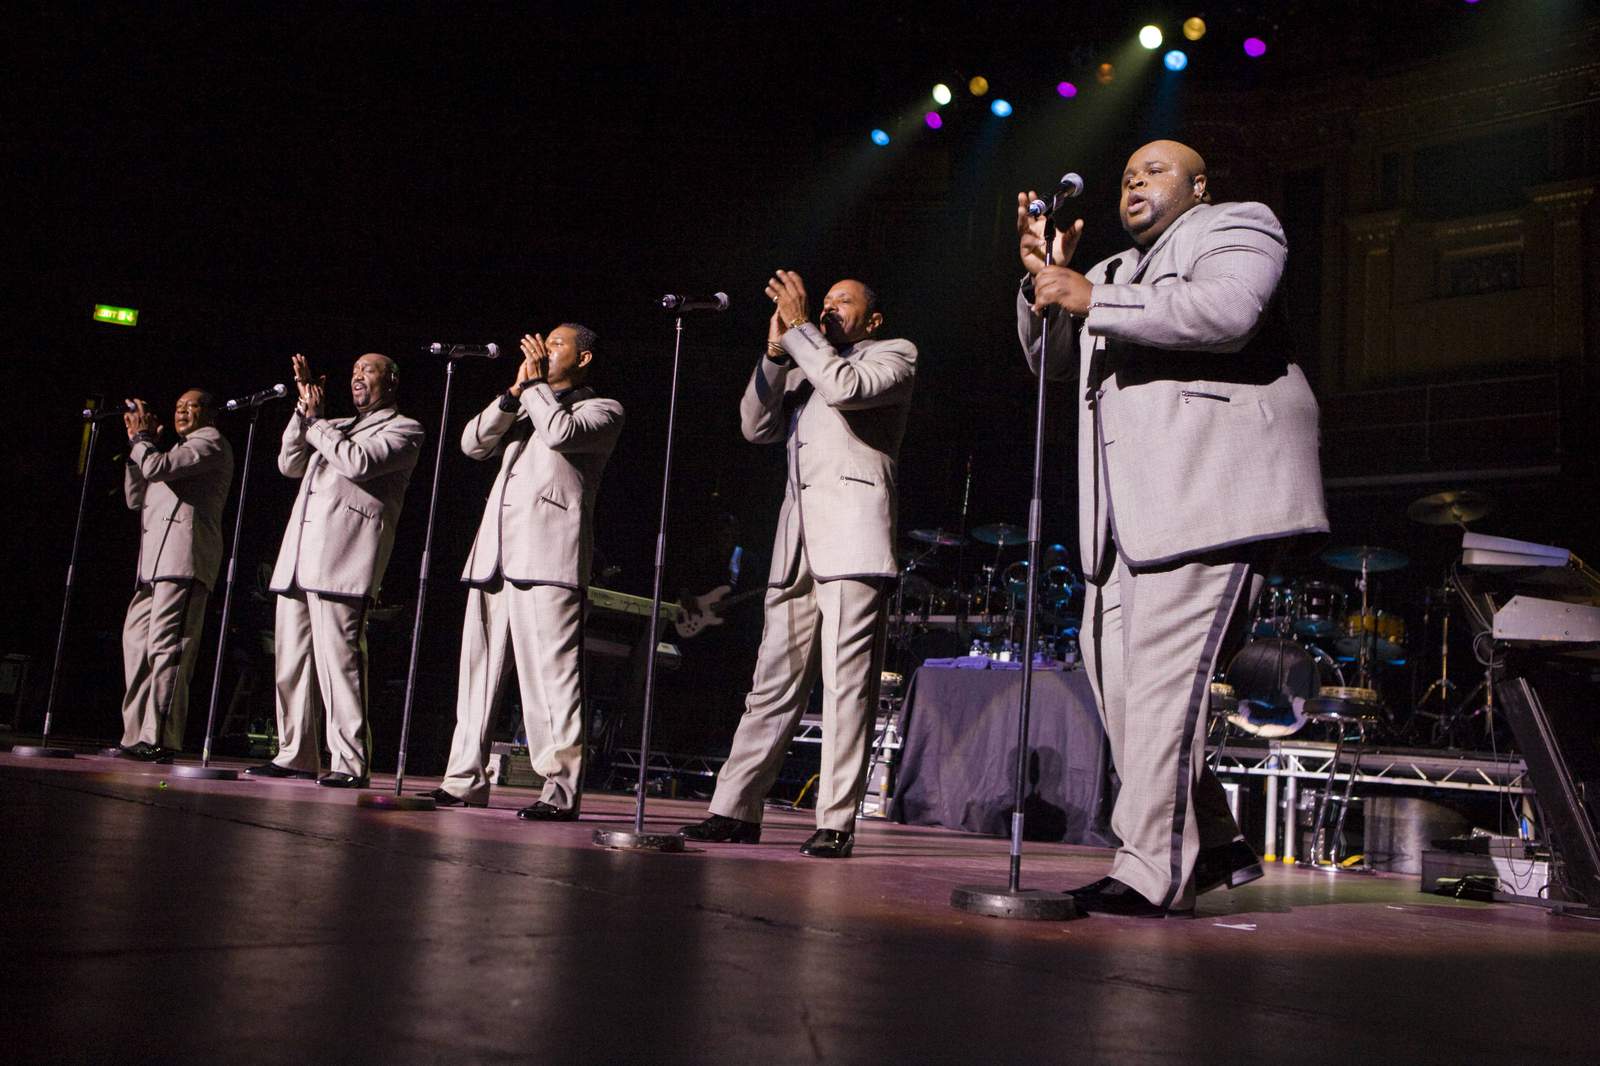 Bruce Williamson, former singer for The Temptations, dies at 49